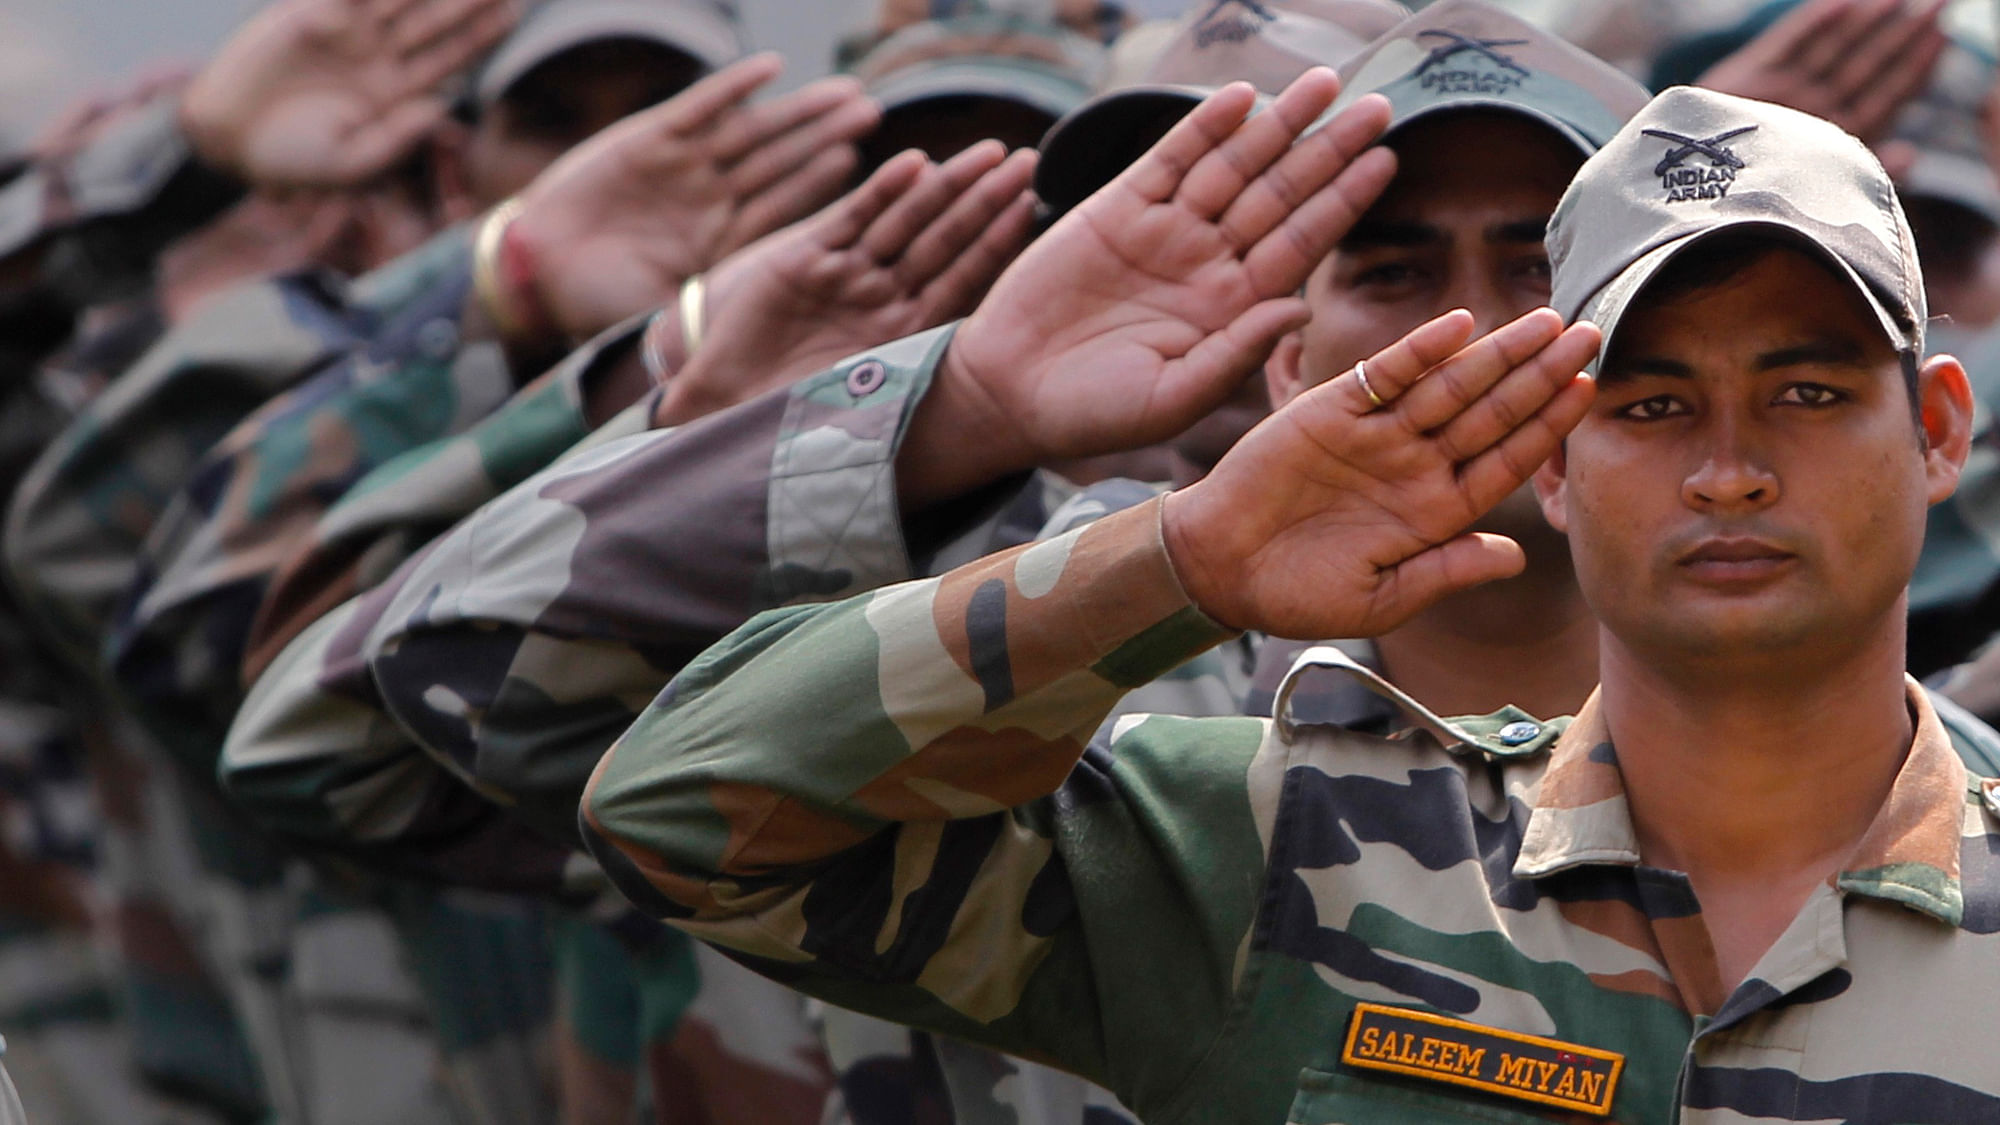 25 lakh ex-servicemen will benefit from One Rank One Pension that will initially cost the government Rs 8,300 crore (Photo: Reuters)